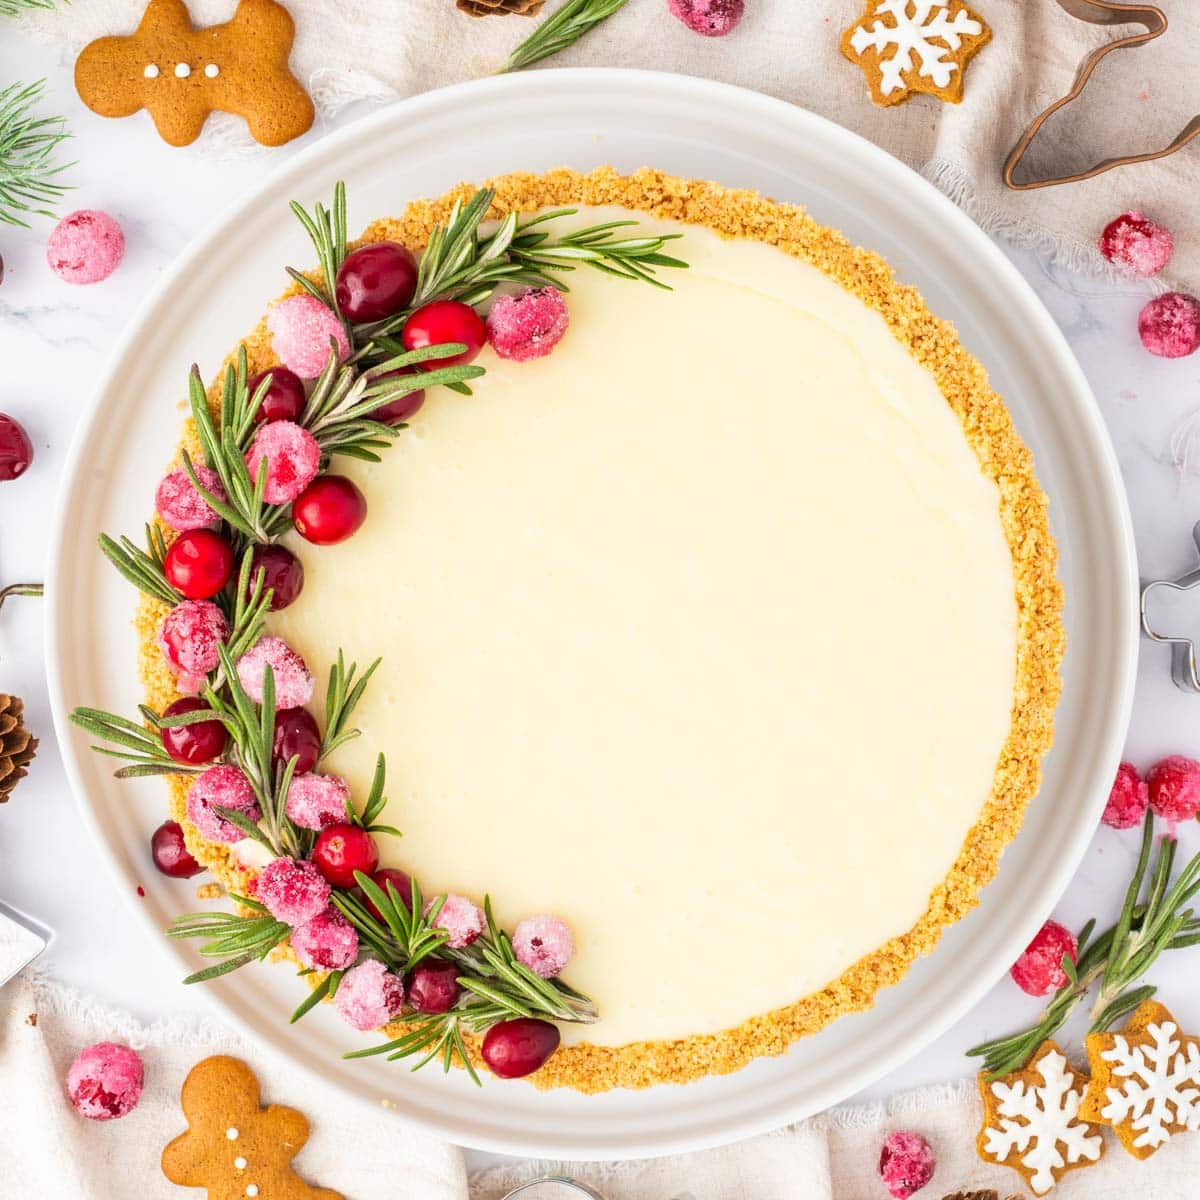 A white chocolate tart garnished with sugared cranberries and rosemary.